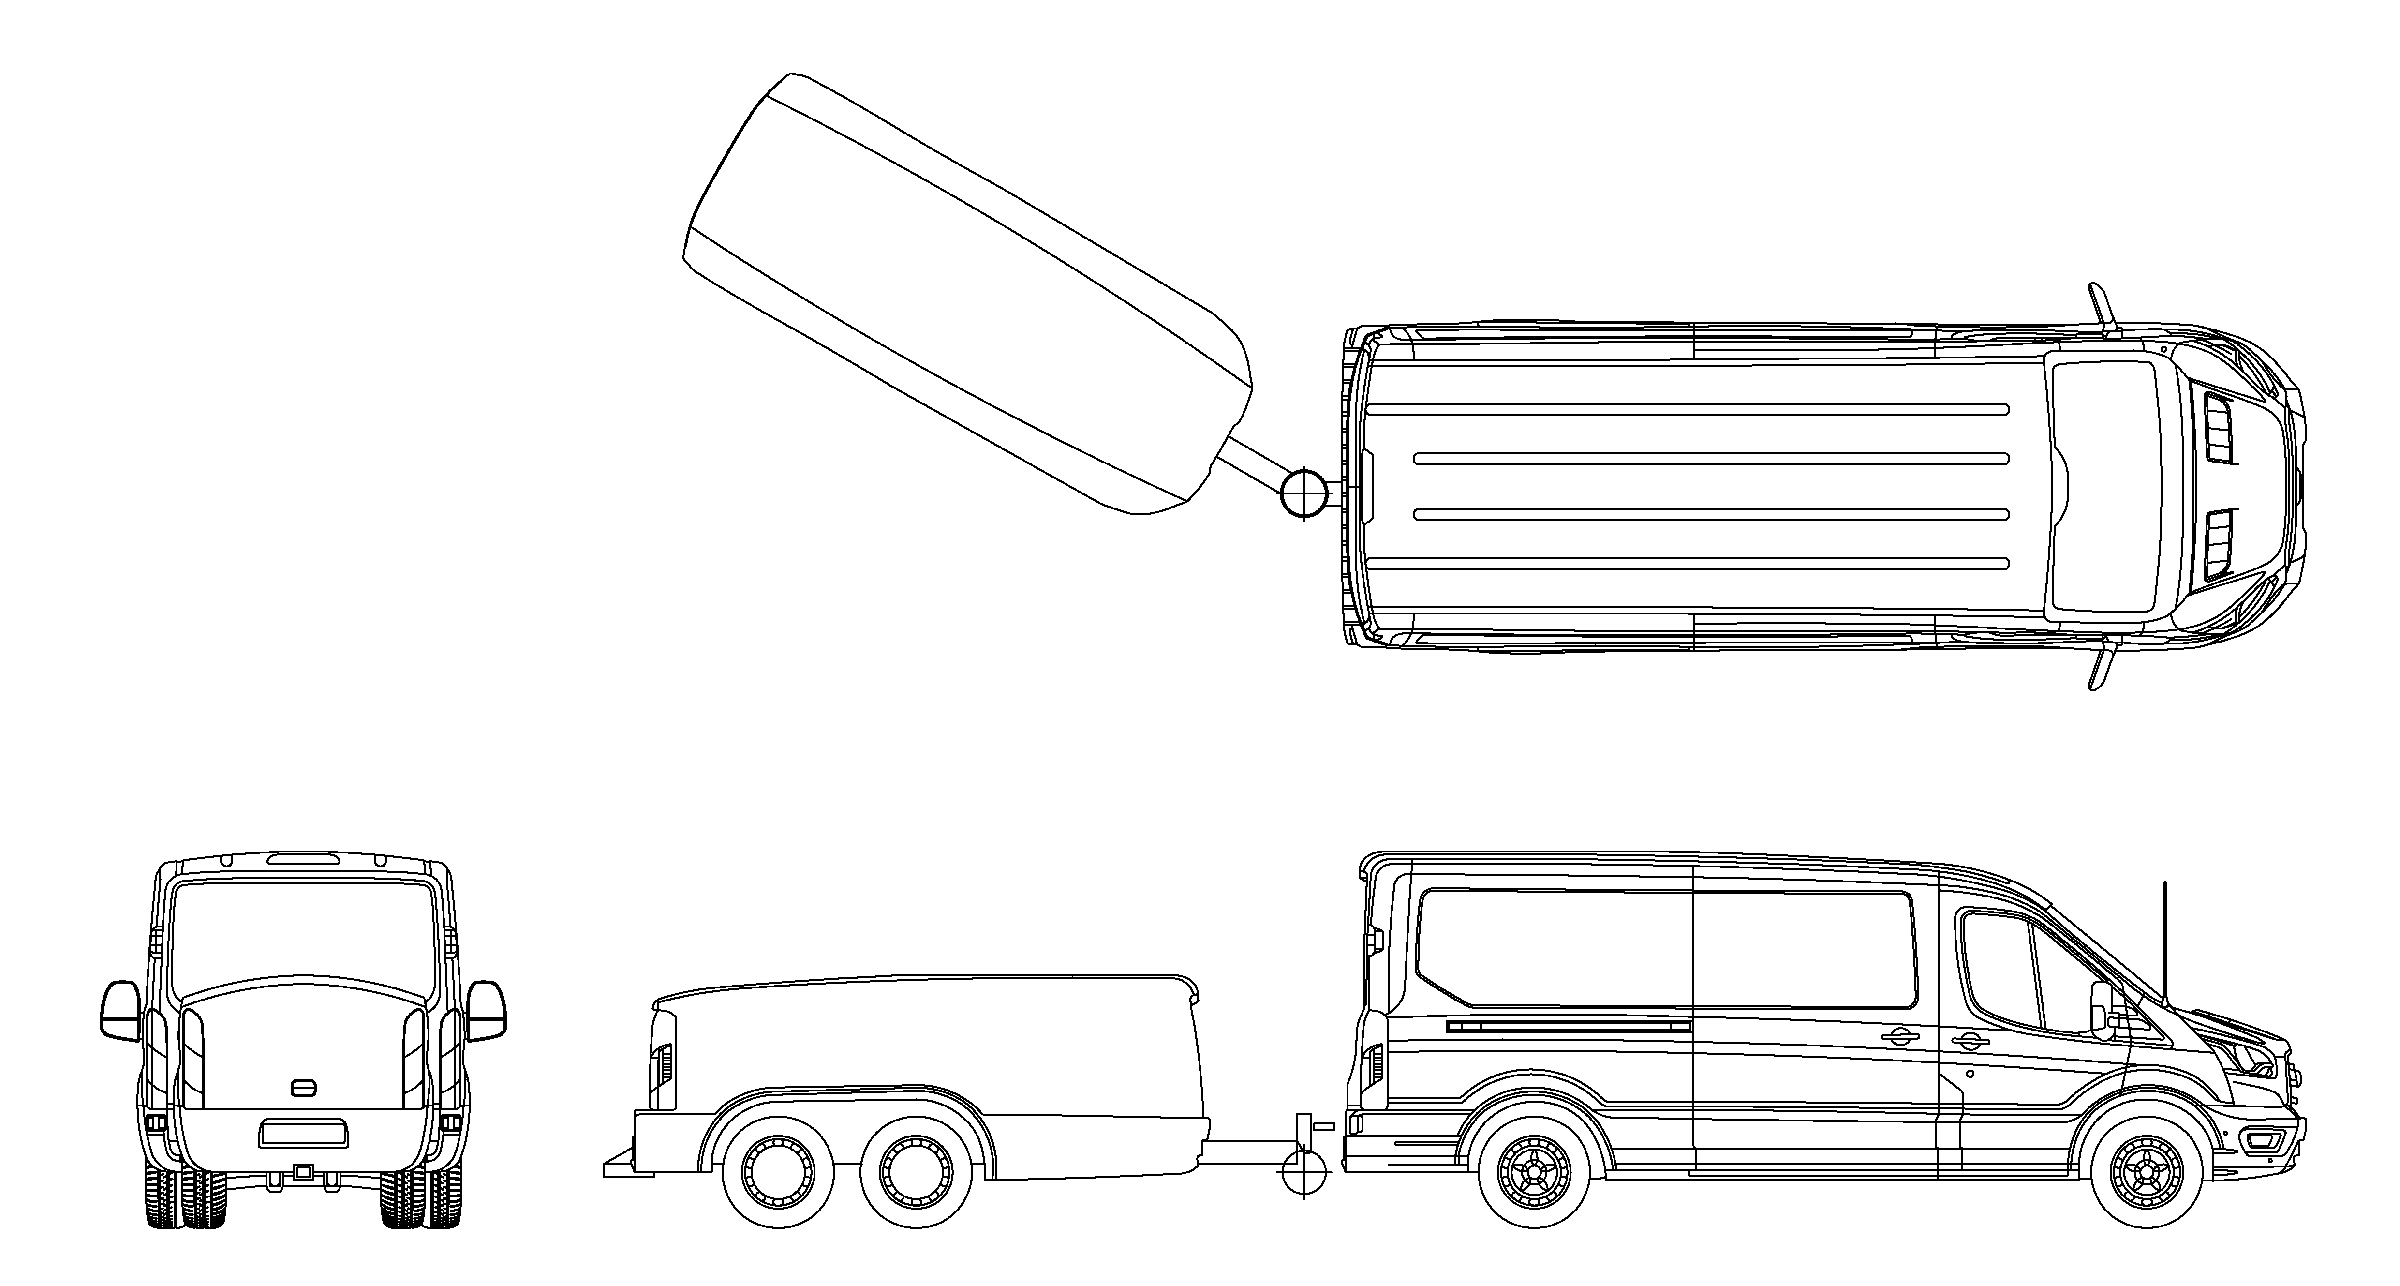 Proposed Ford E-Transit with Glideway system